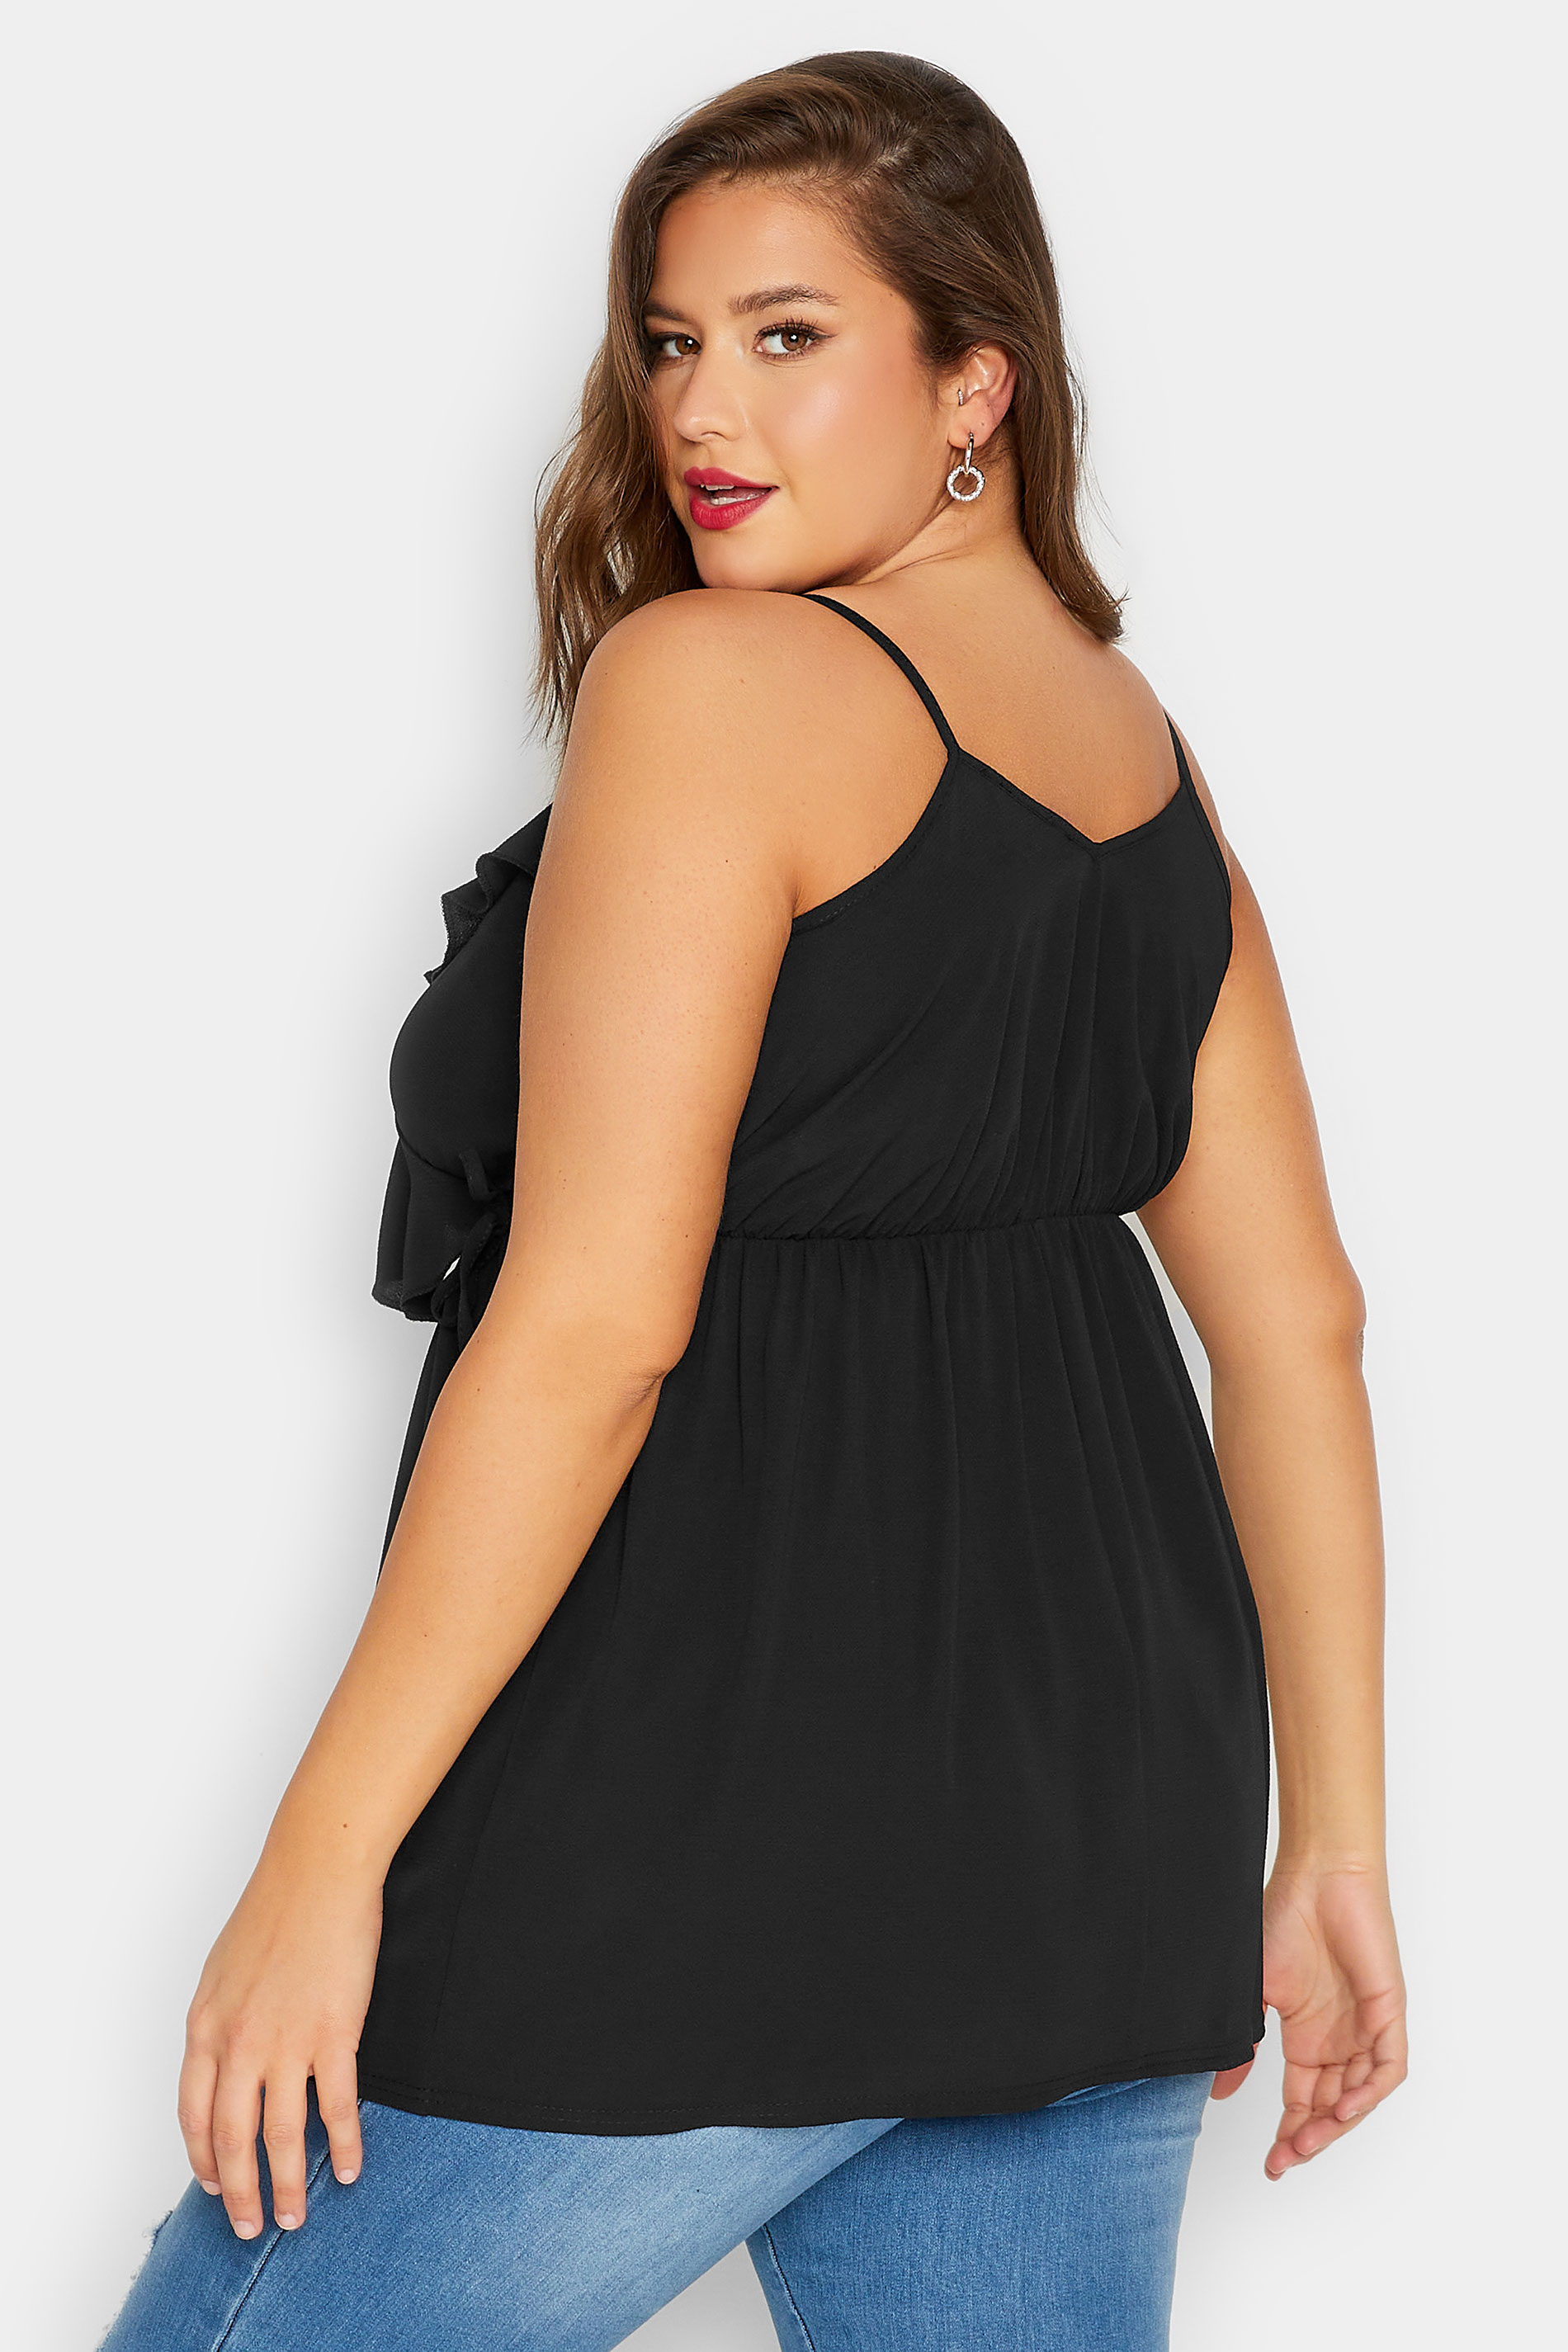 LIMITED COLLECTION Plus Size Black Wrap Cami Vest Top | Yours Clothing 3